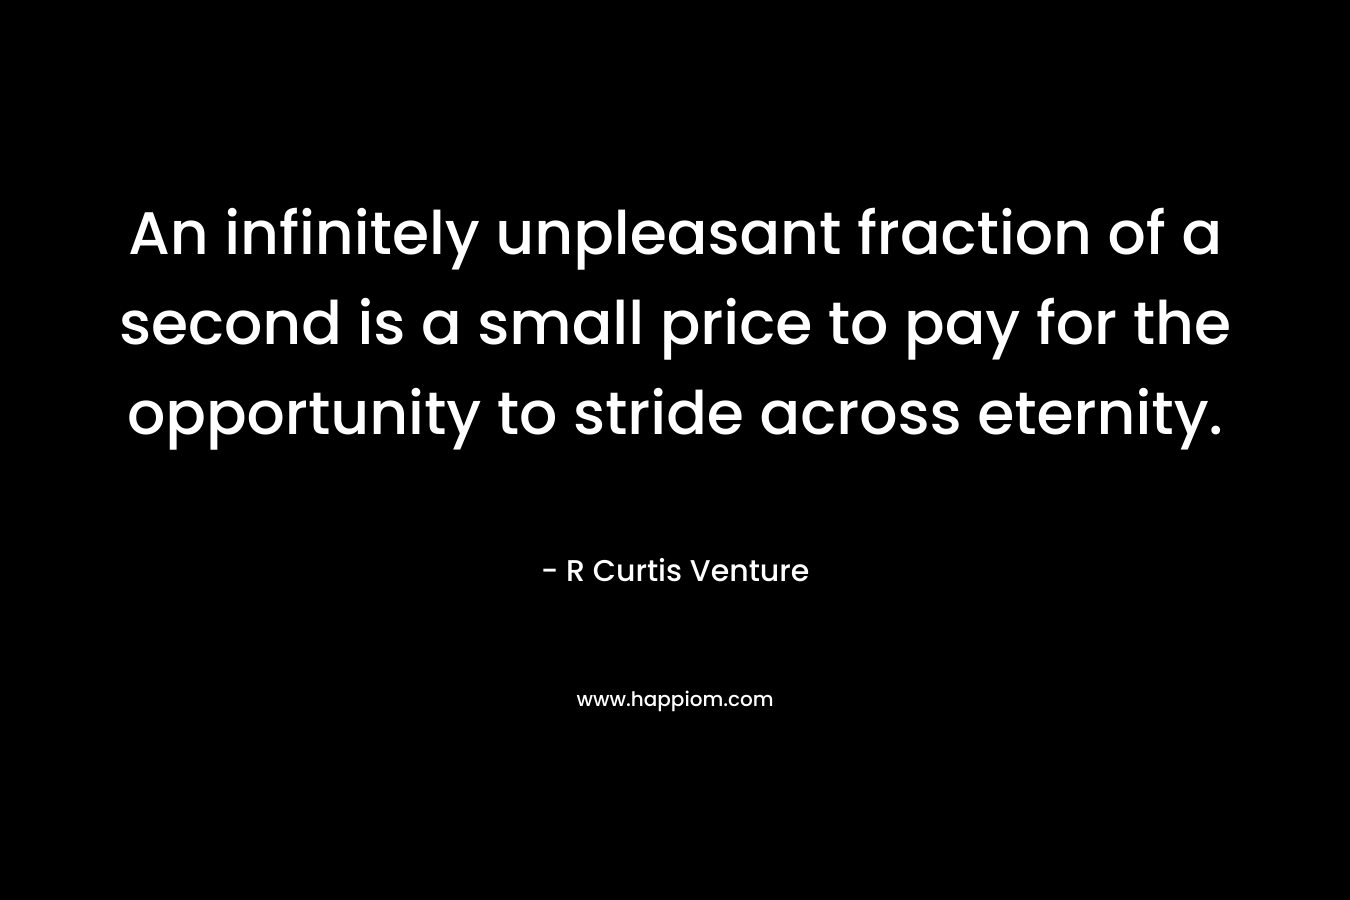 An infinitely unpleasant fraction of a second is a small price to pay for the opportunity to stride across eternity. – R Curtis Venture